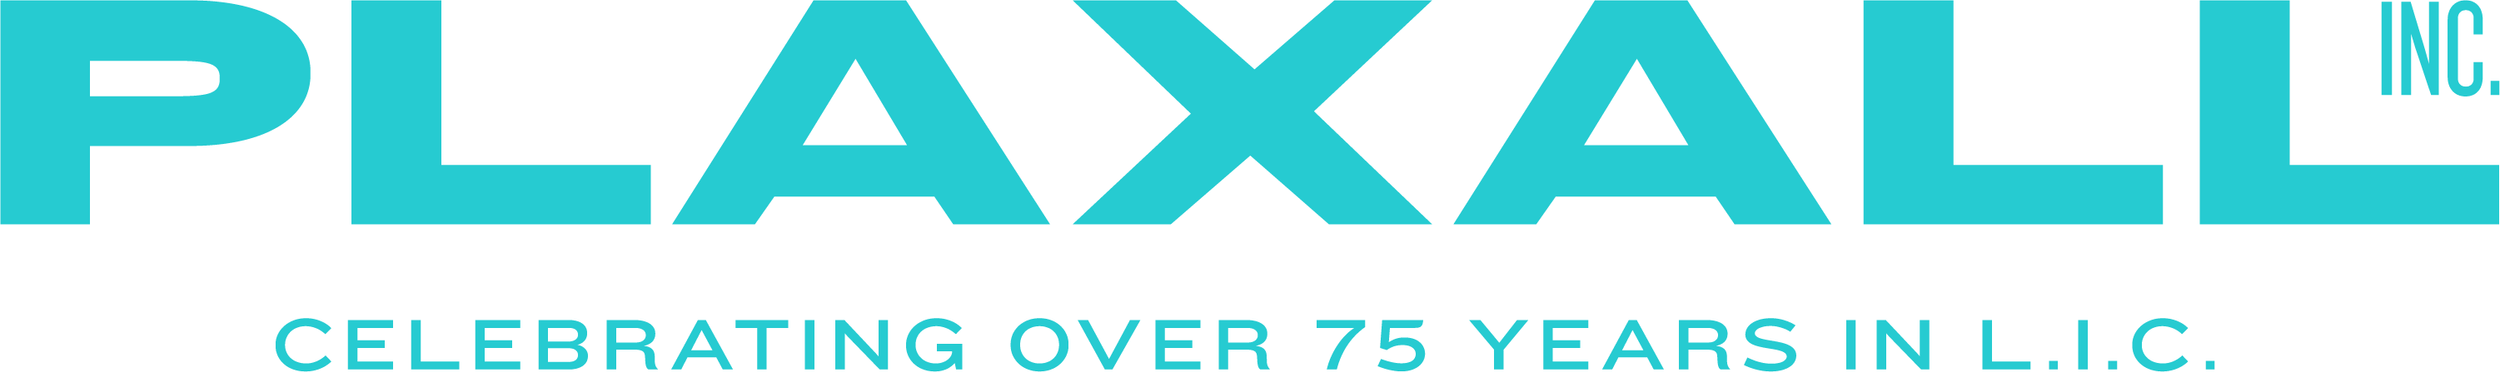 Plaxall Logo Teal 75 Years.png